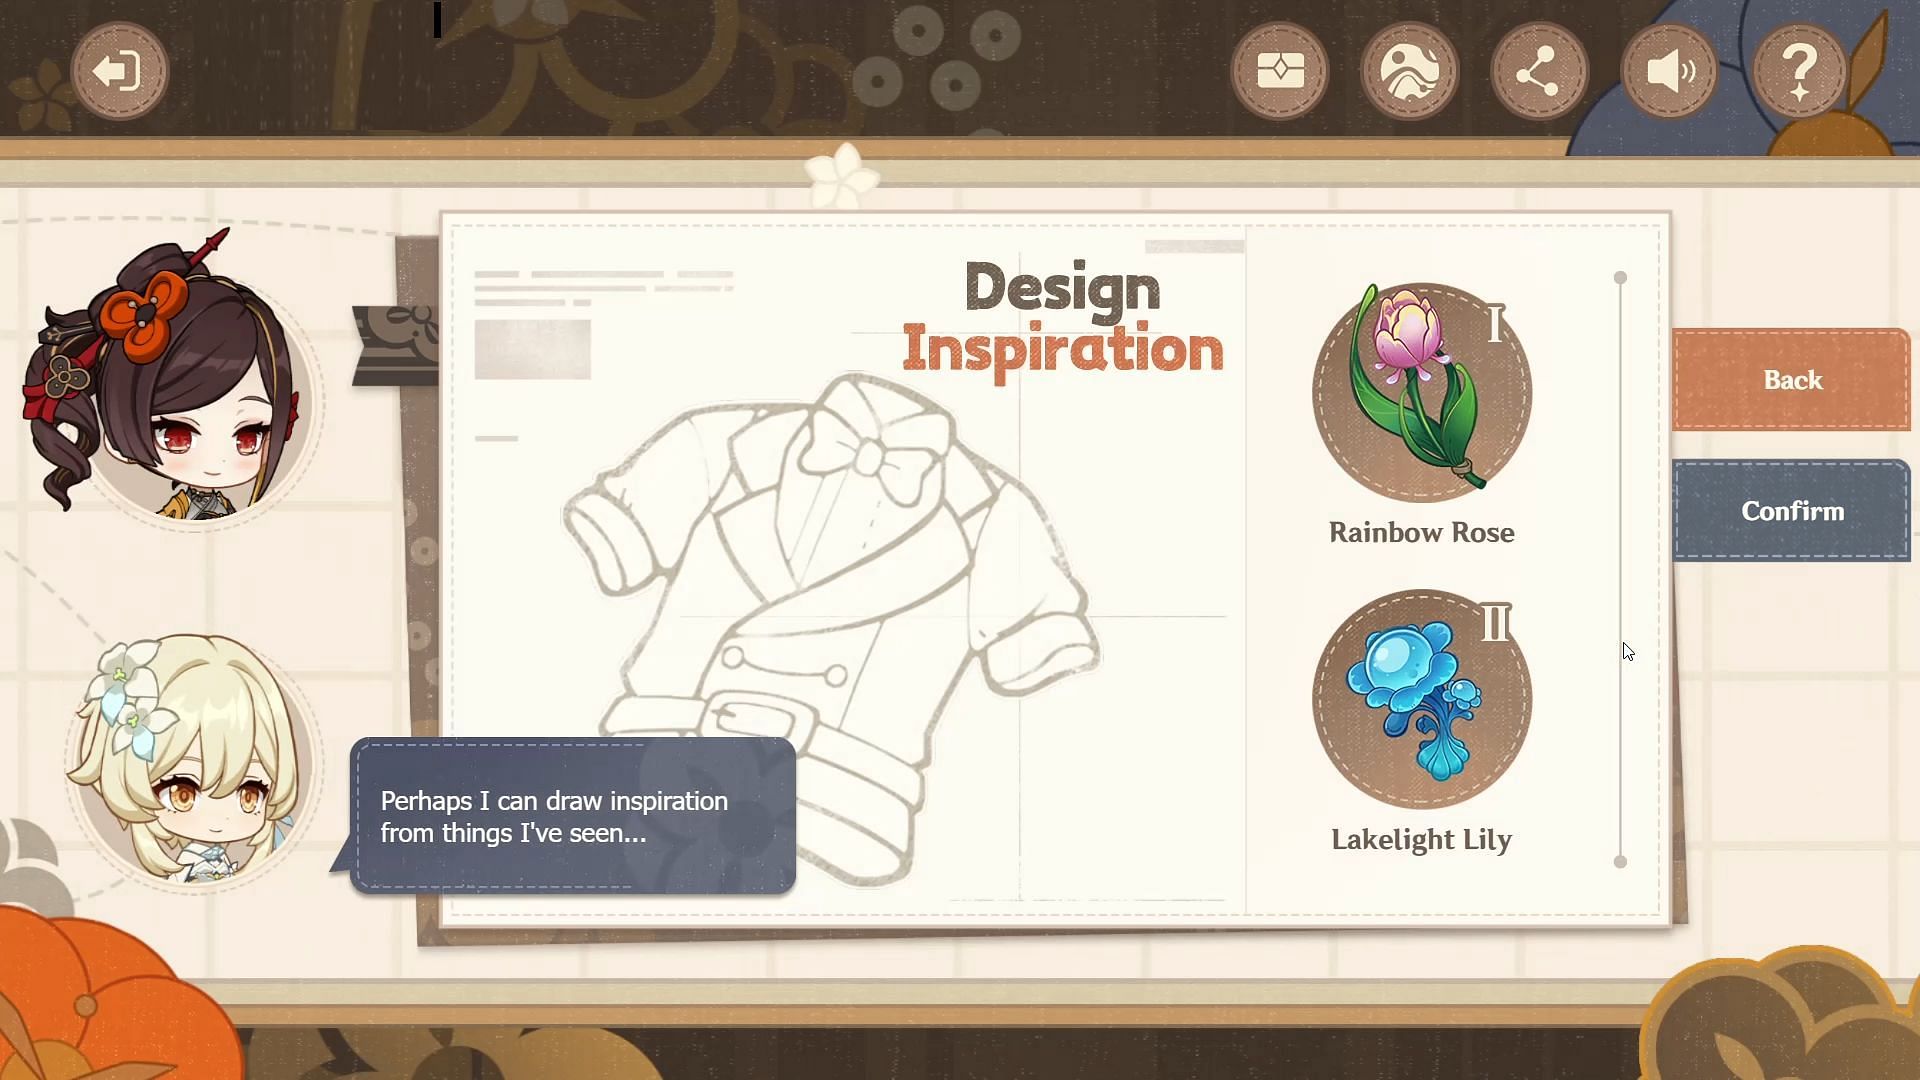 Select any inspiration for the design (Image via HoYoverse)